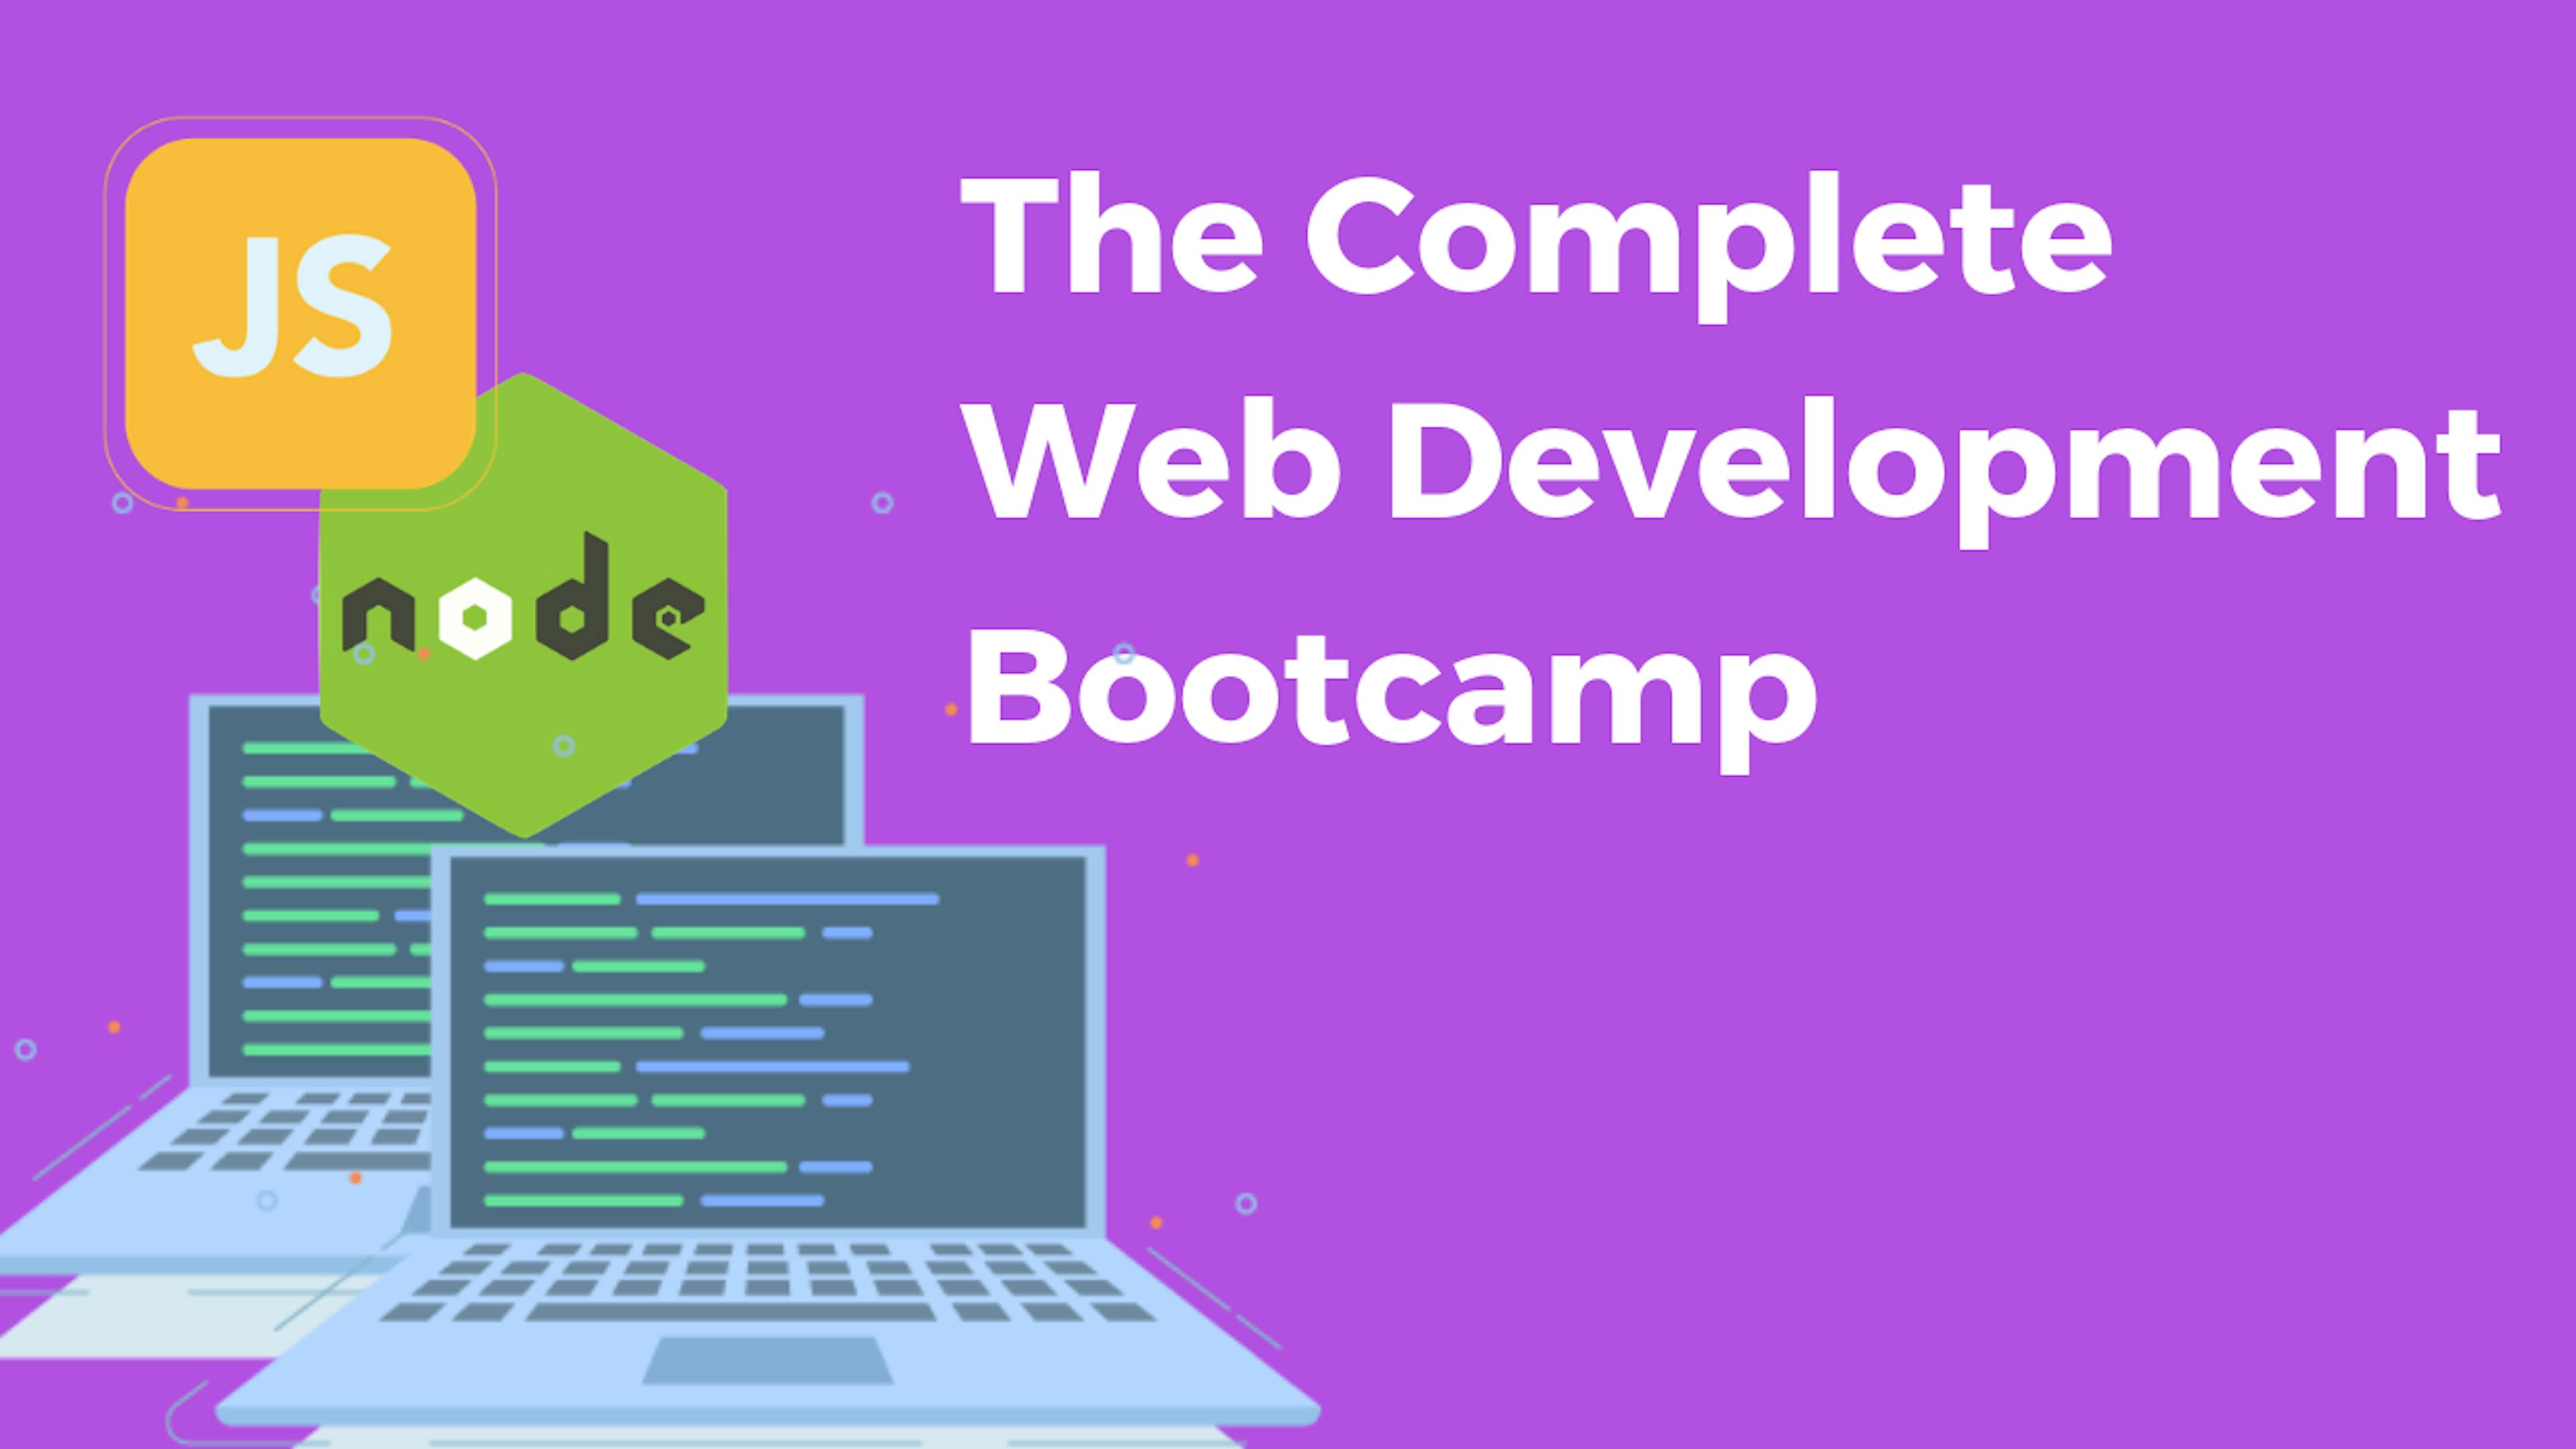 The Complete Web Development Course | The App Brewery